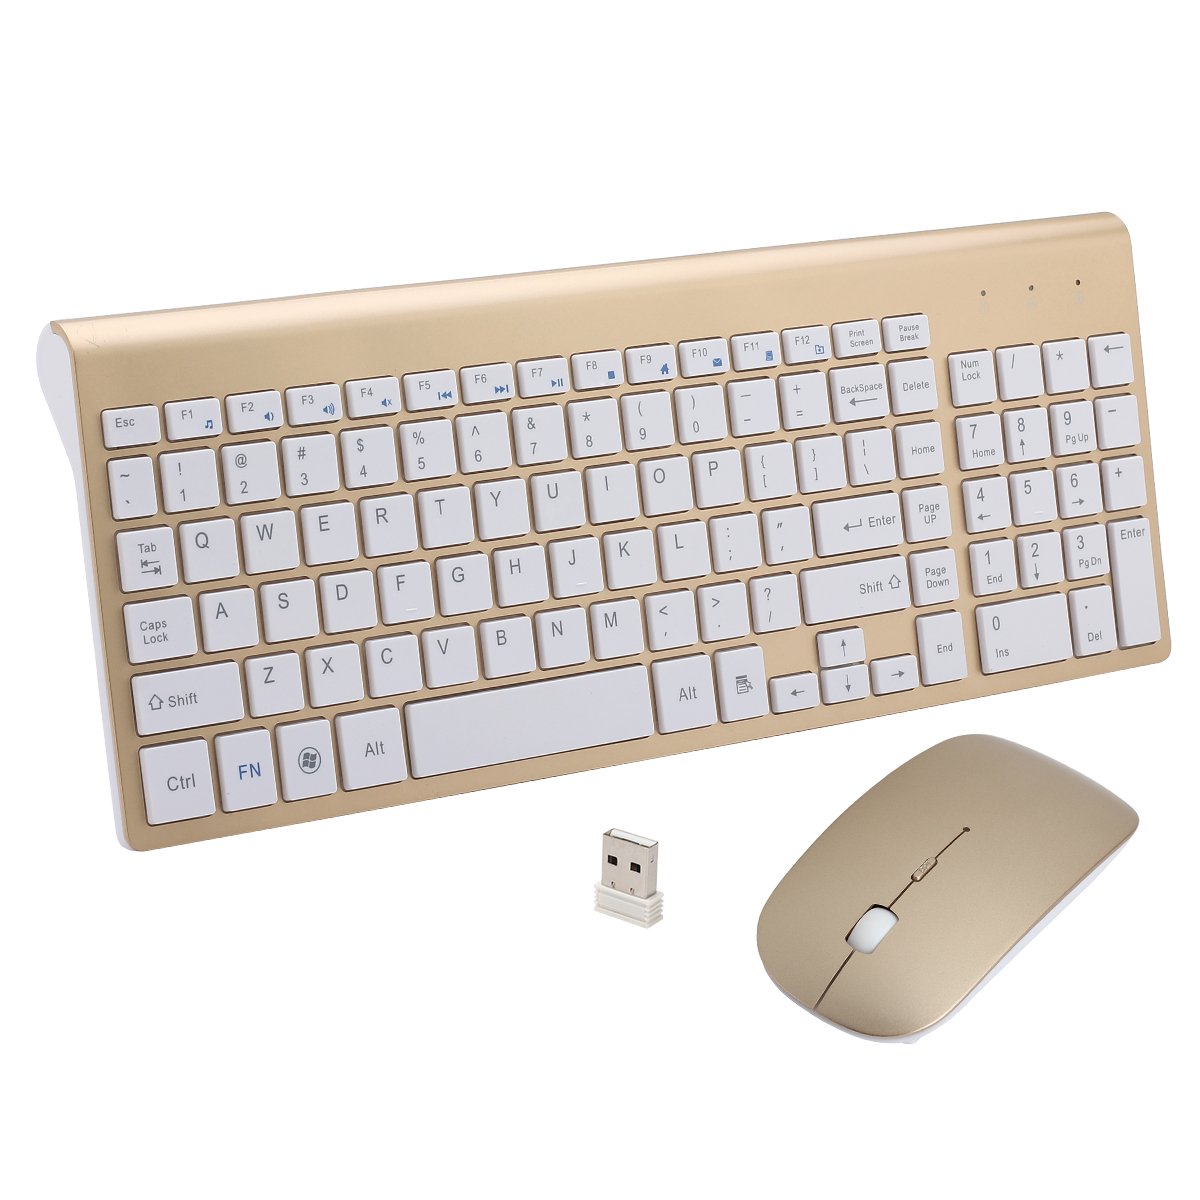 HAIBING Wireless Keyboard and Mouse Combo,Compact Full-Sized 2.4GHz Ultra Slim Wireless Keyboard with Number Pad and Power-Saving Mouse for Office Windows 10,Laptop,PC,Computer,Desktop,Gold01